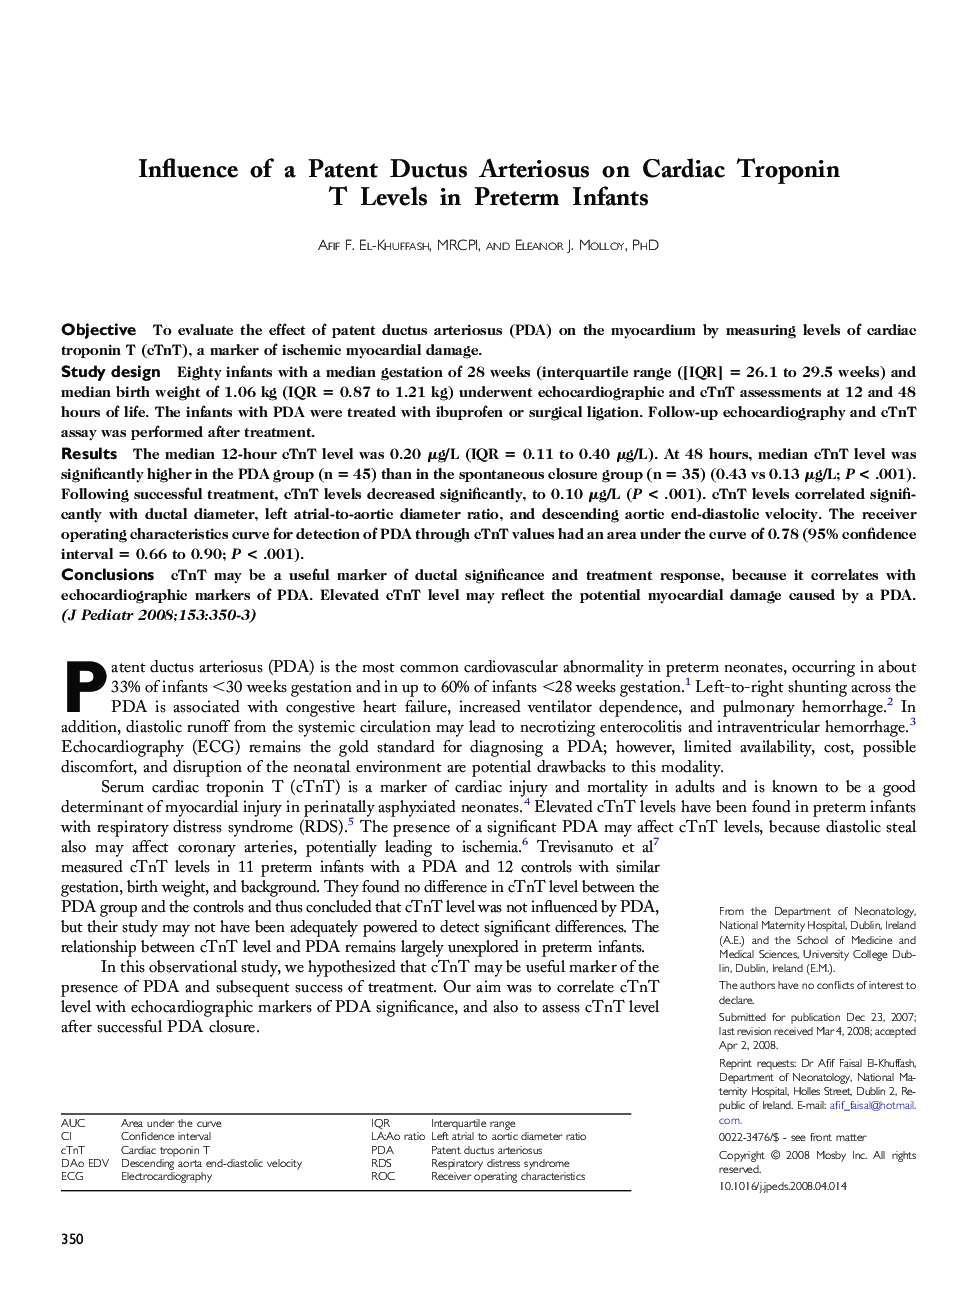 Influence of a Patent Ductus Arteriosus on Cardiac Troponin T Levels in Preterm Infants